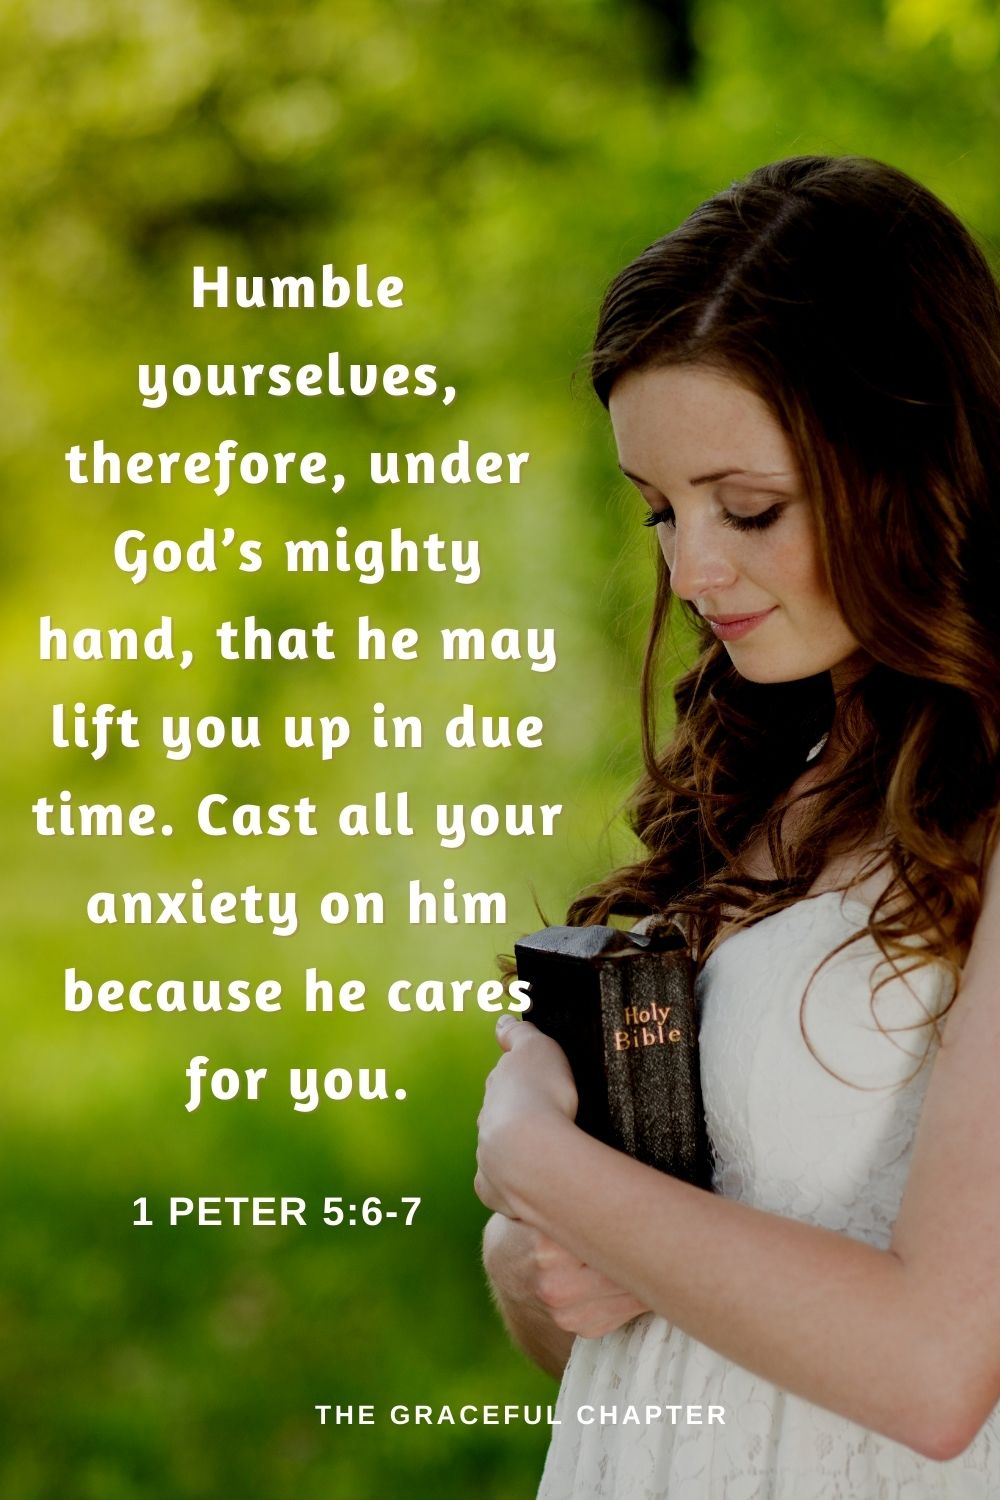 Humble yourselves, therefore, under God’s mighty hand, that he may lift you up in due time. Cast all your anxiety on him because he cares for you.